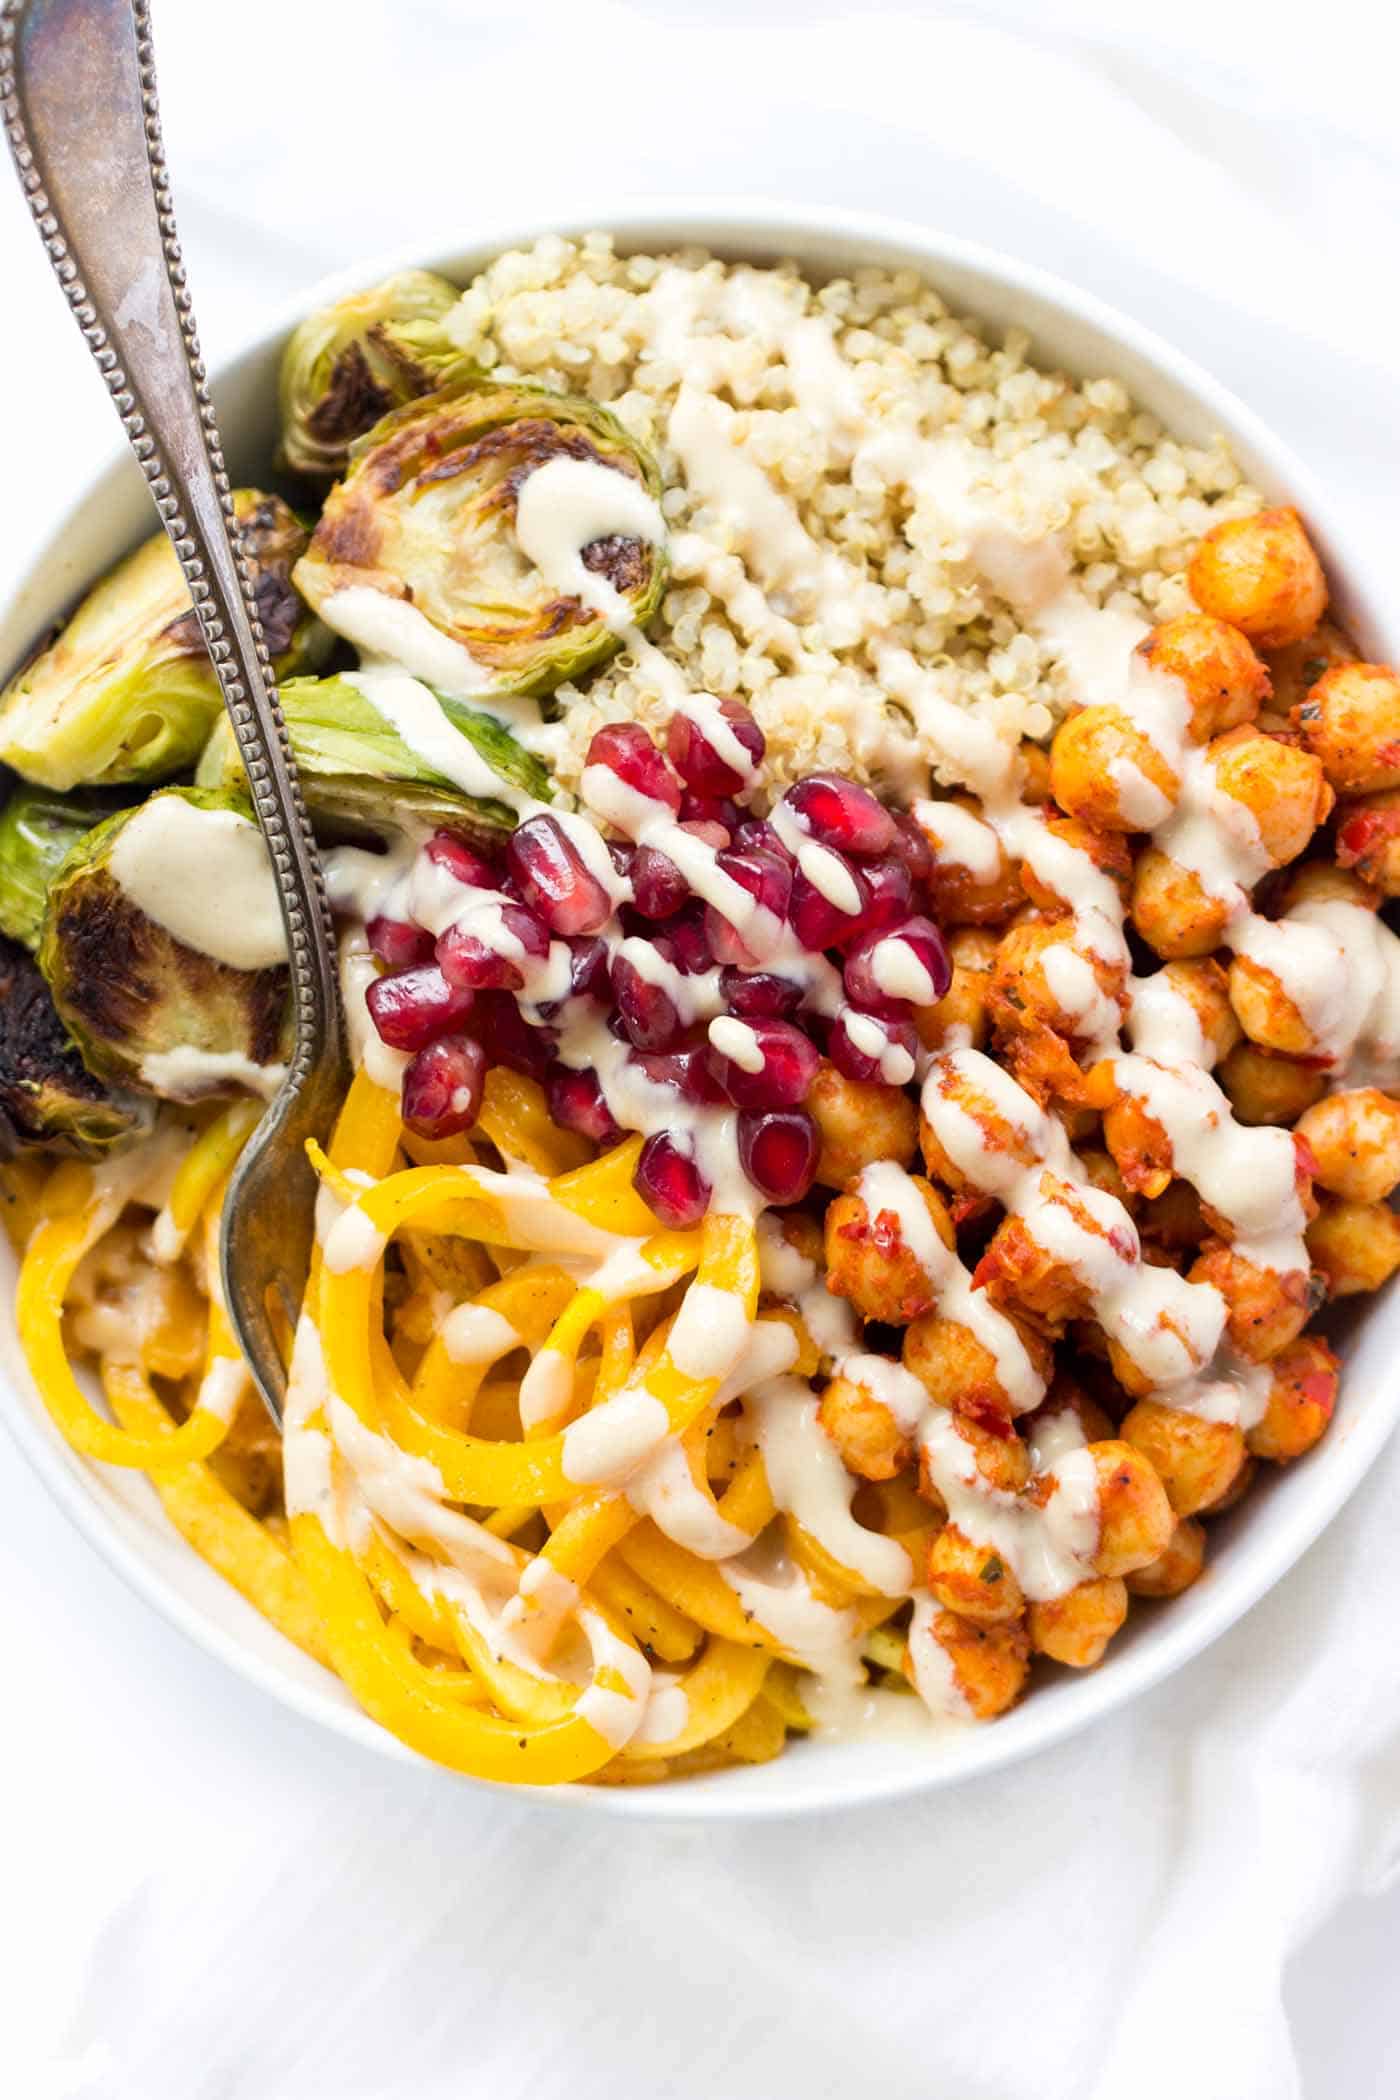 These WARM quinoa bowls use spiralized butternut squash, roasted brussels sprouts and harissa spiced chickpeas - easy, nutritious and healthy! 